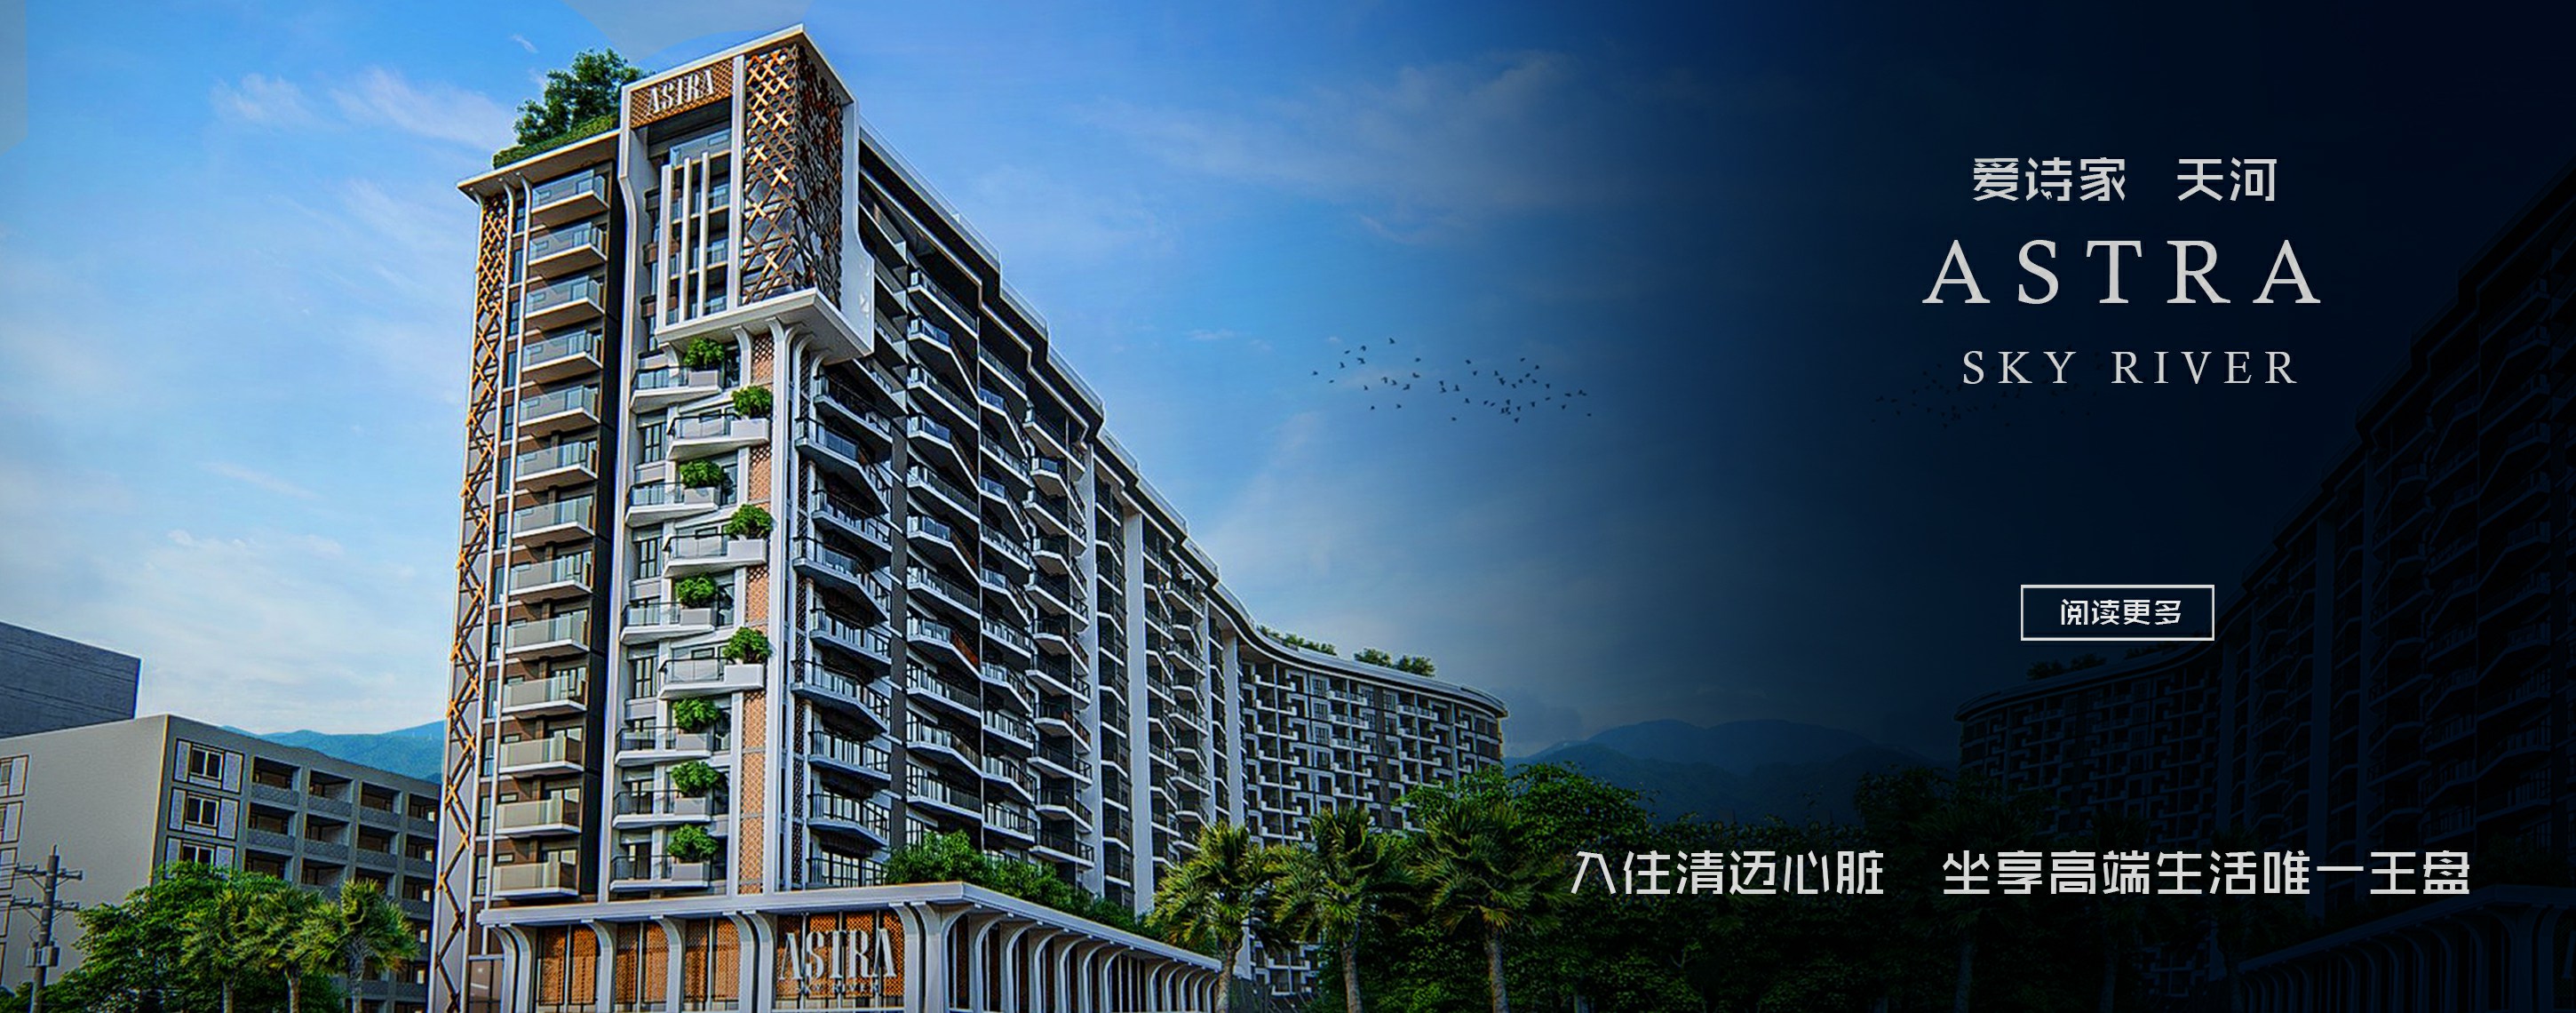 https://www.cnthai.cn/properties/the-astra-sky-river/